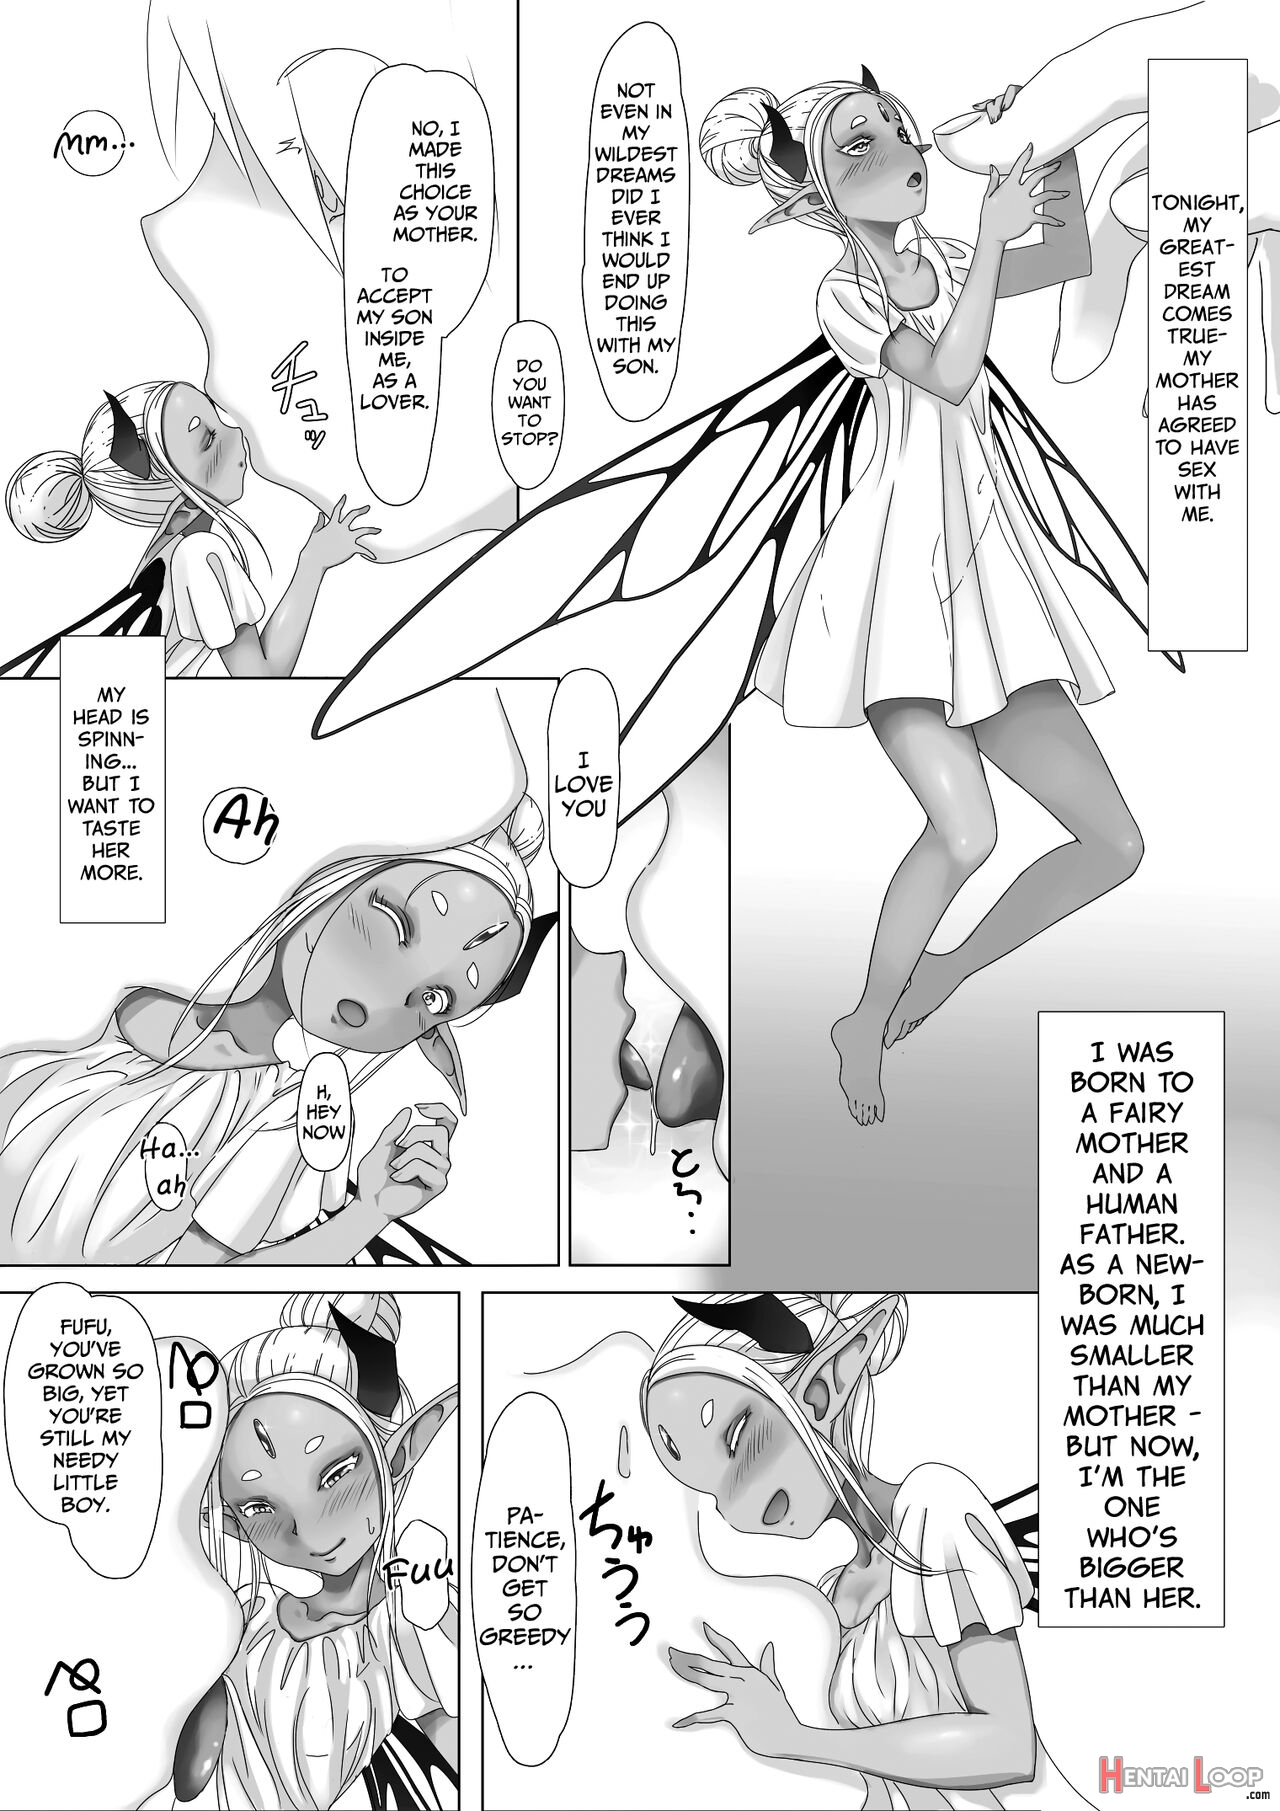 the Story Of A Fairy Mother Mating With Her Son Until She's Pregnant With His Child page 2